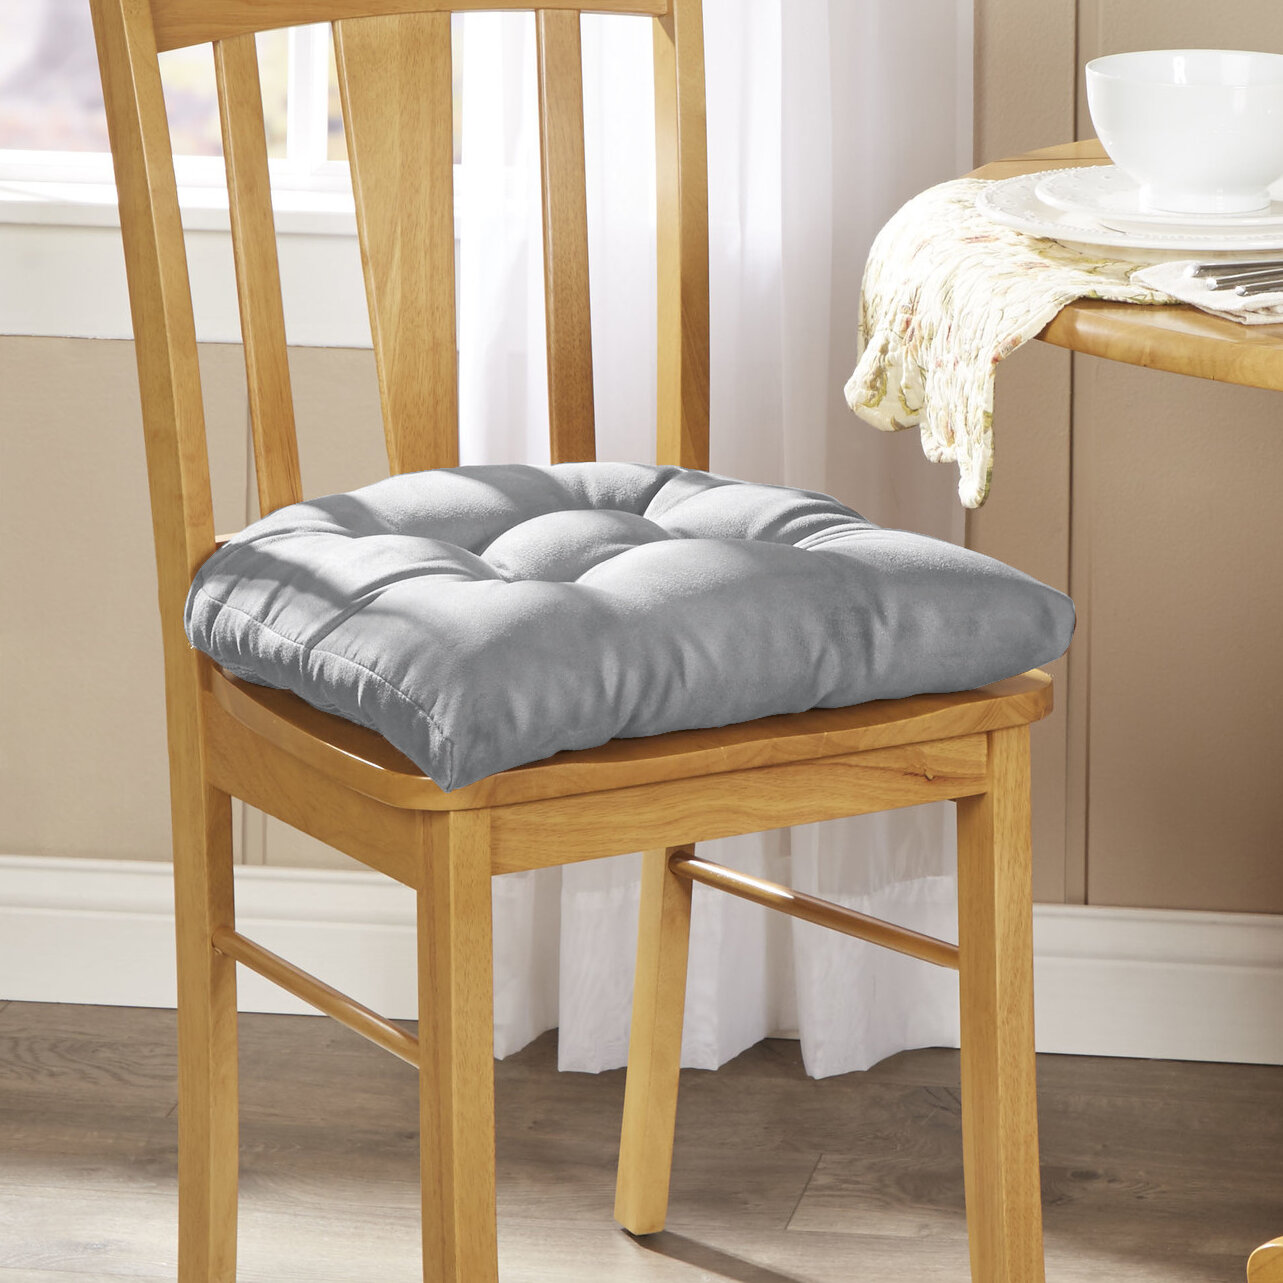 Dining Chair Seat Cushions Free Shipping Over 35 Wayfair